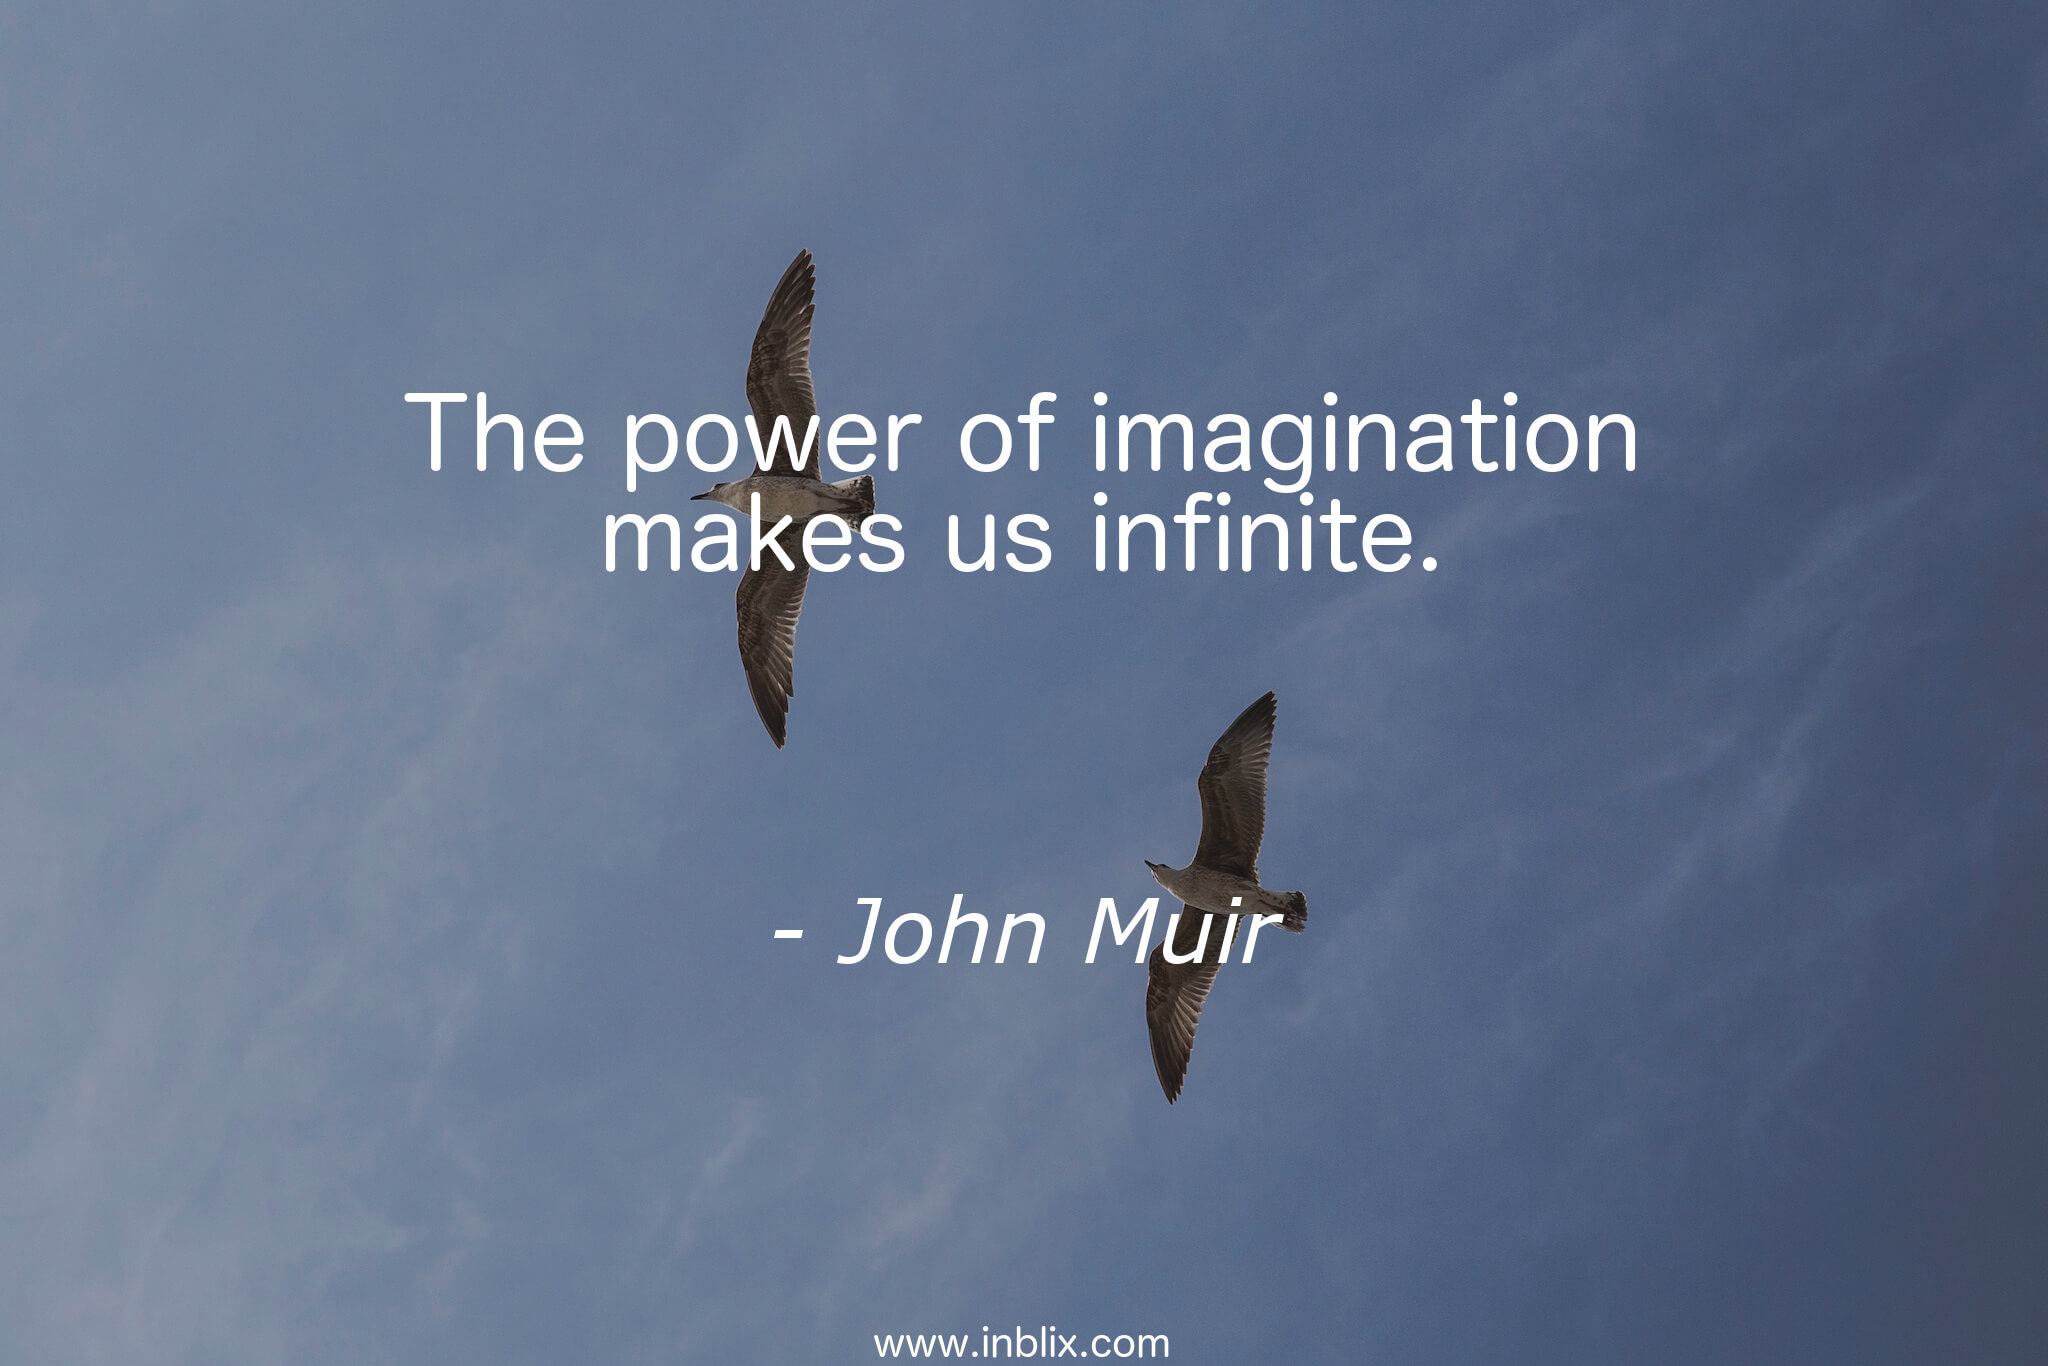 The Power Of Imagination Makes Us Infinite - Power Of Imagination Makes Us Infinite - HD Wallpaper 